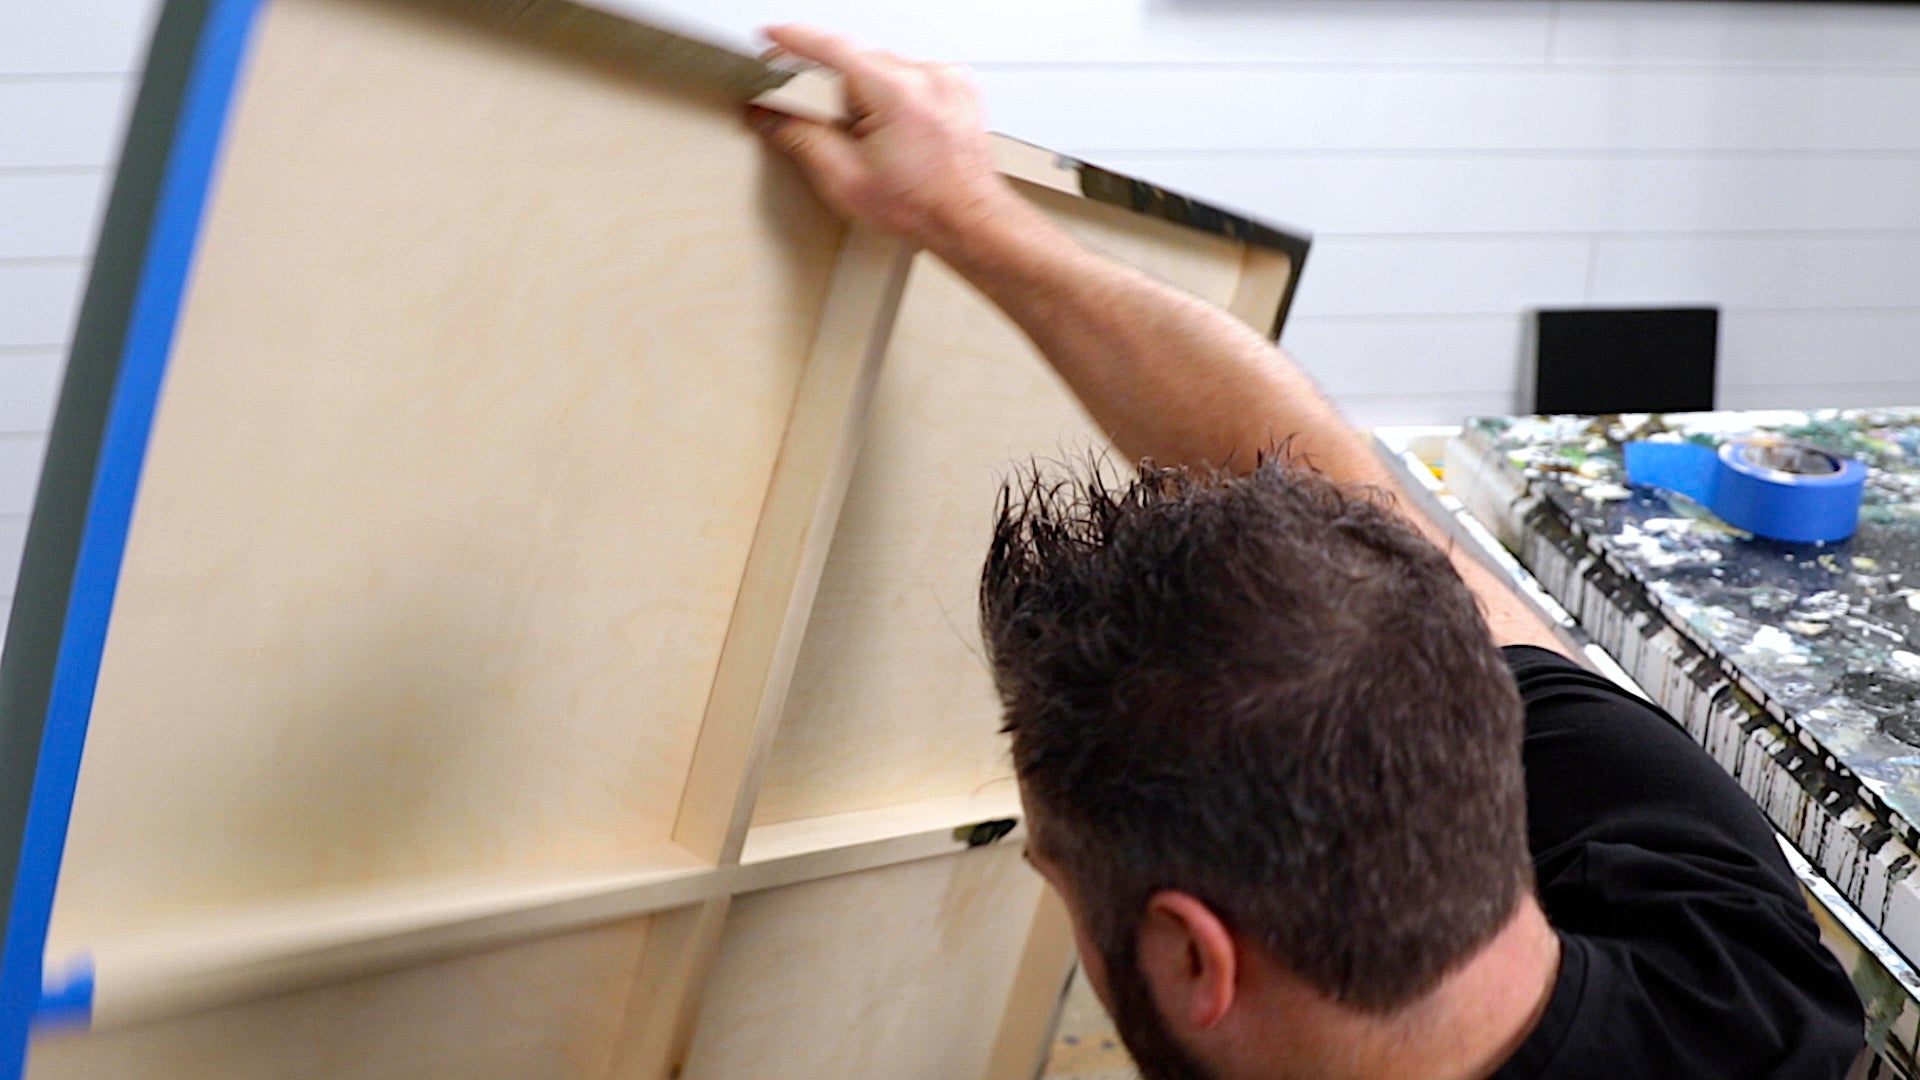 how to resin a large painting - use a wooden panel to support the weight of the resin